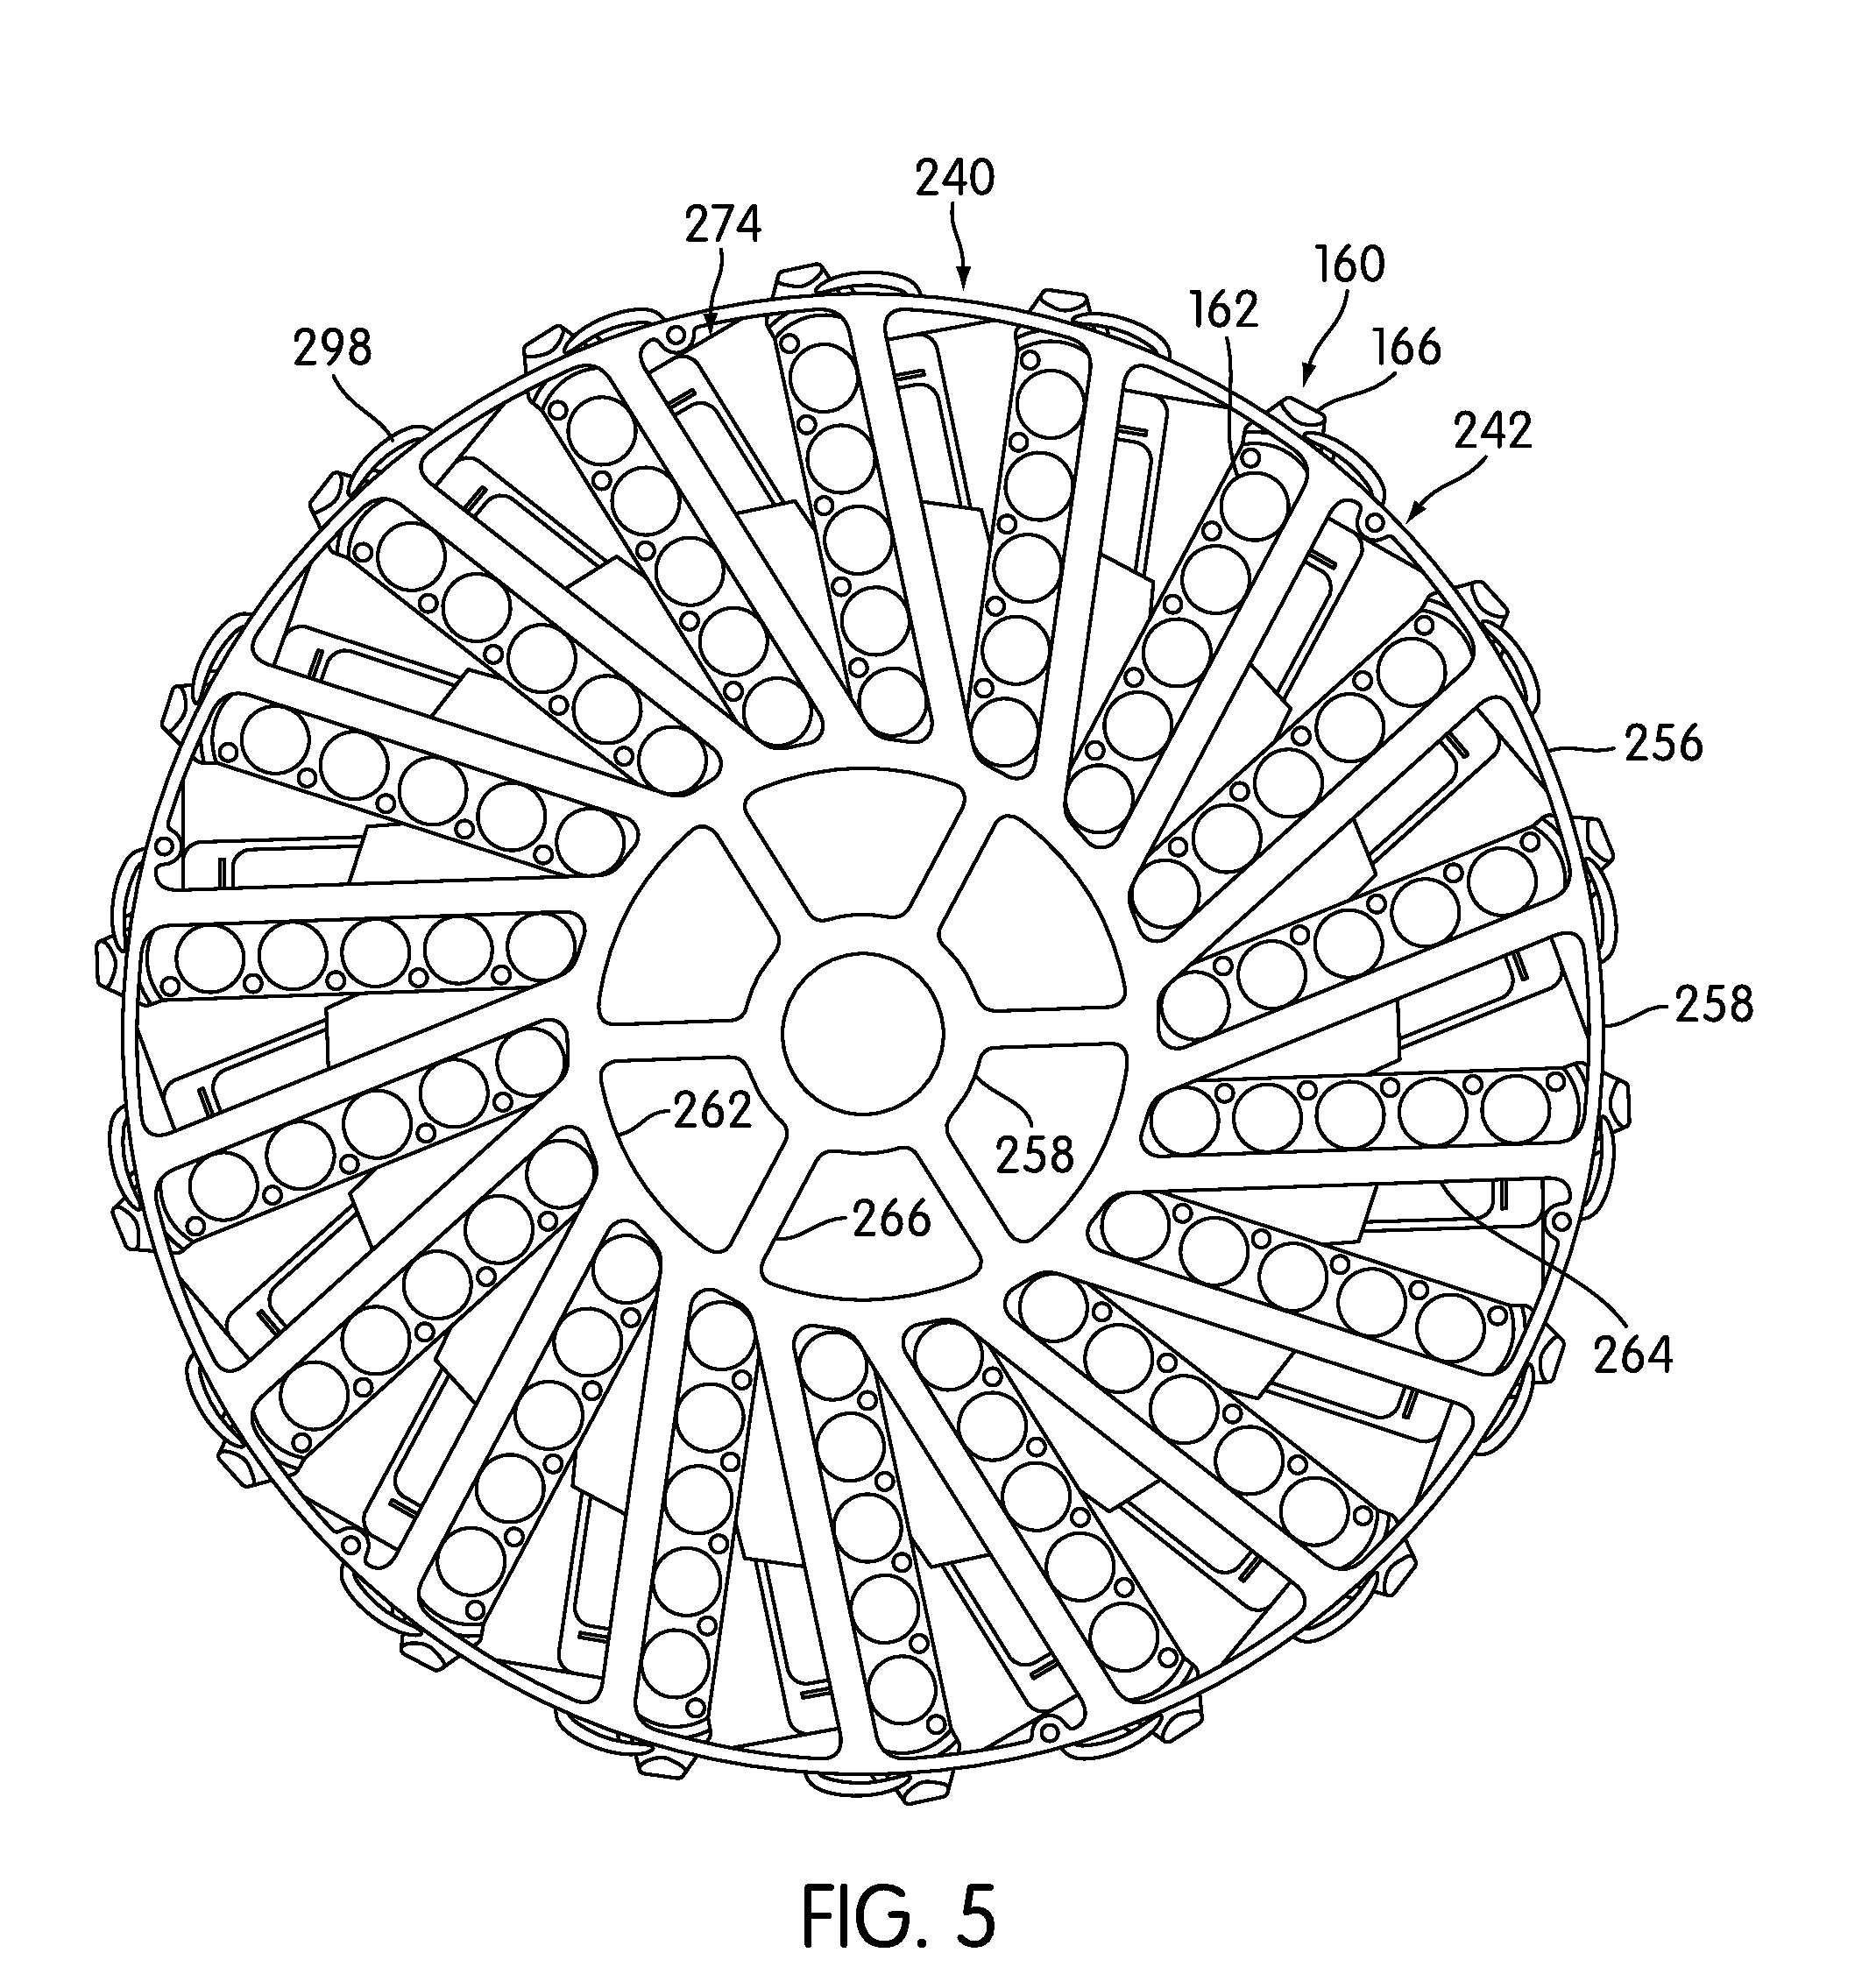 Systems and methods for distinguishing optical signals of different modulation frequencies in an optical signal detector